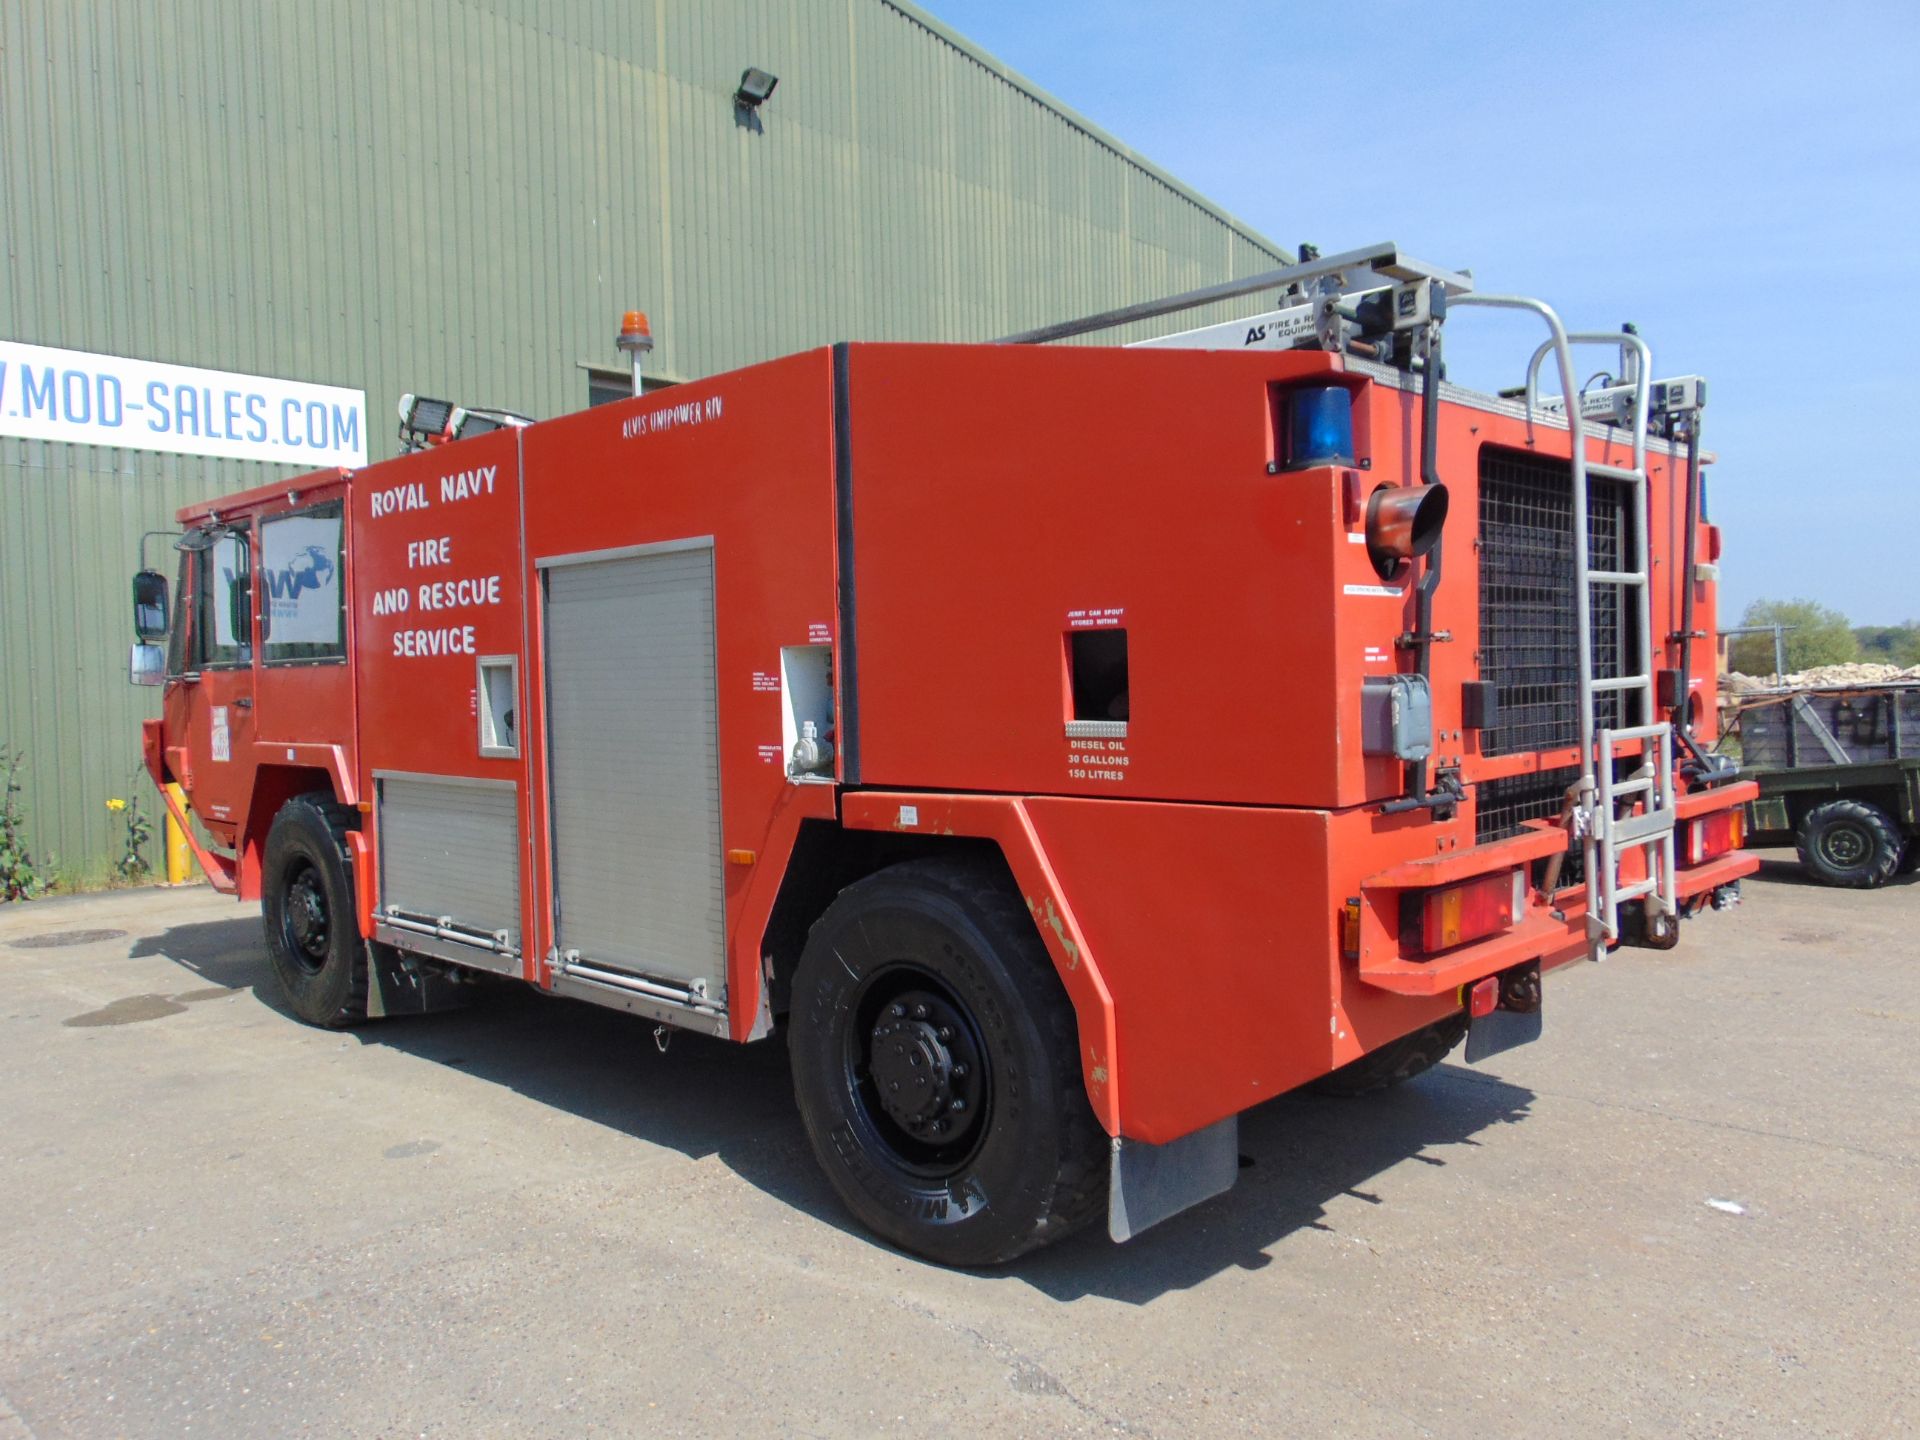 Unipower 4 x 4 Airport Fire Fighting Appliance - Rapid Intervention Vehicle - Image 16 of 73